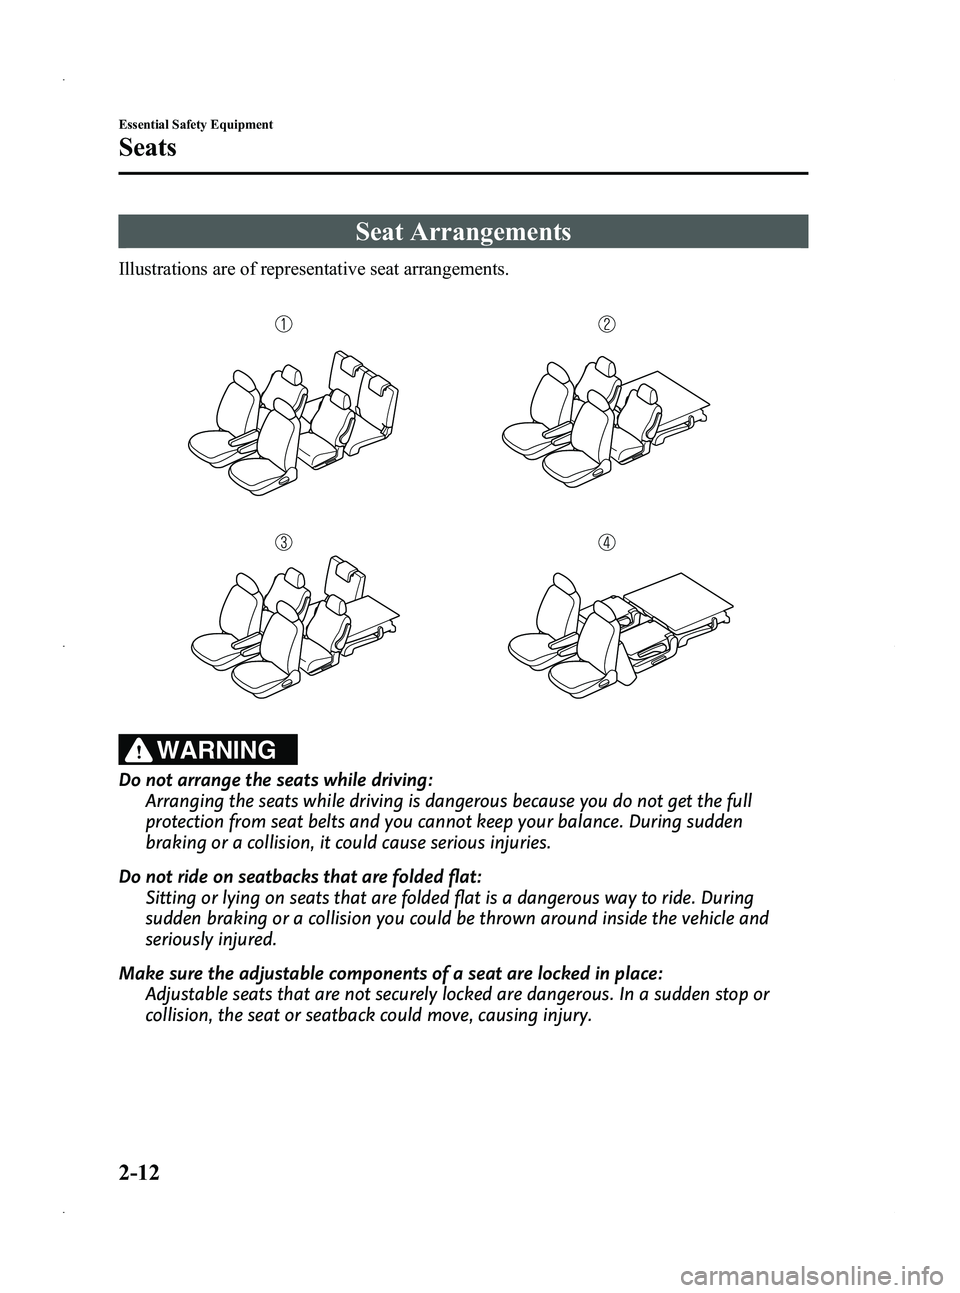 MAZDA MODEL 5 2013 Owners Manual Black plate (24,1)
Seat Arrangements
Illustrations are of representative seat arrangements.
WARNING
Do not arrange the seats while driving:Arranging the seats while driving is dangerous because you do